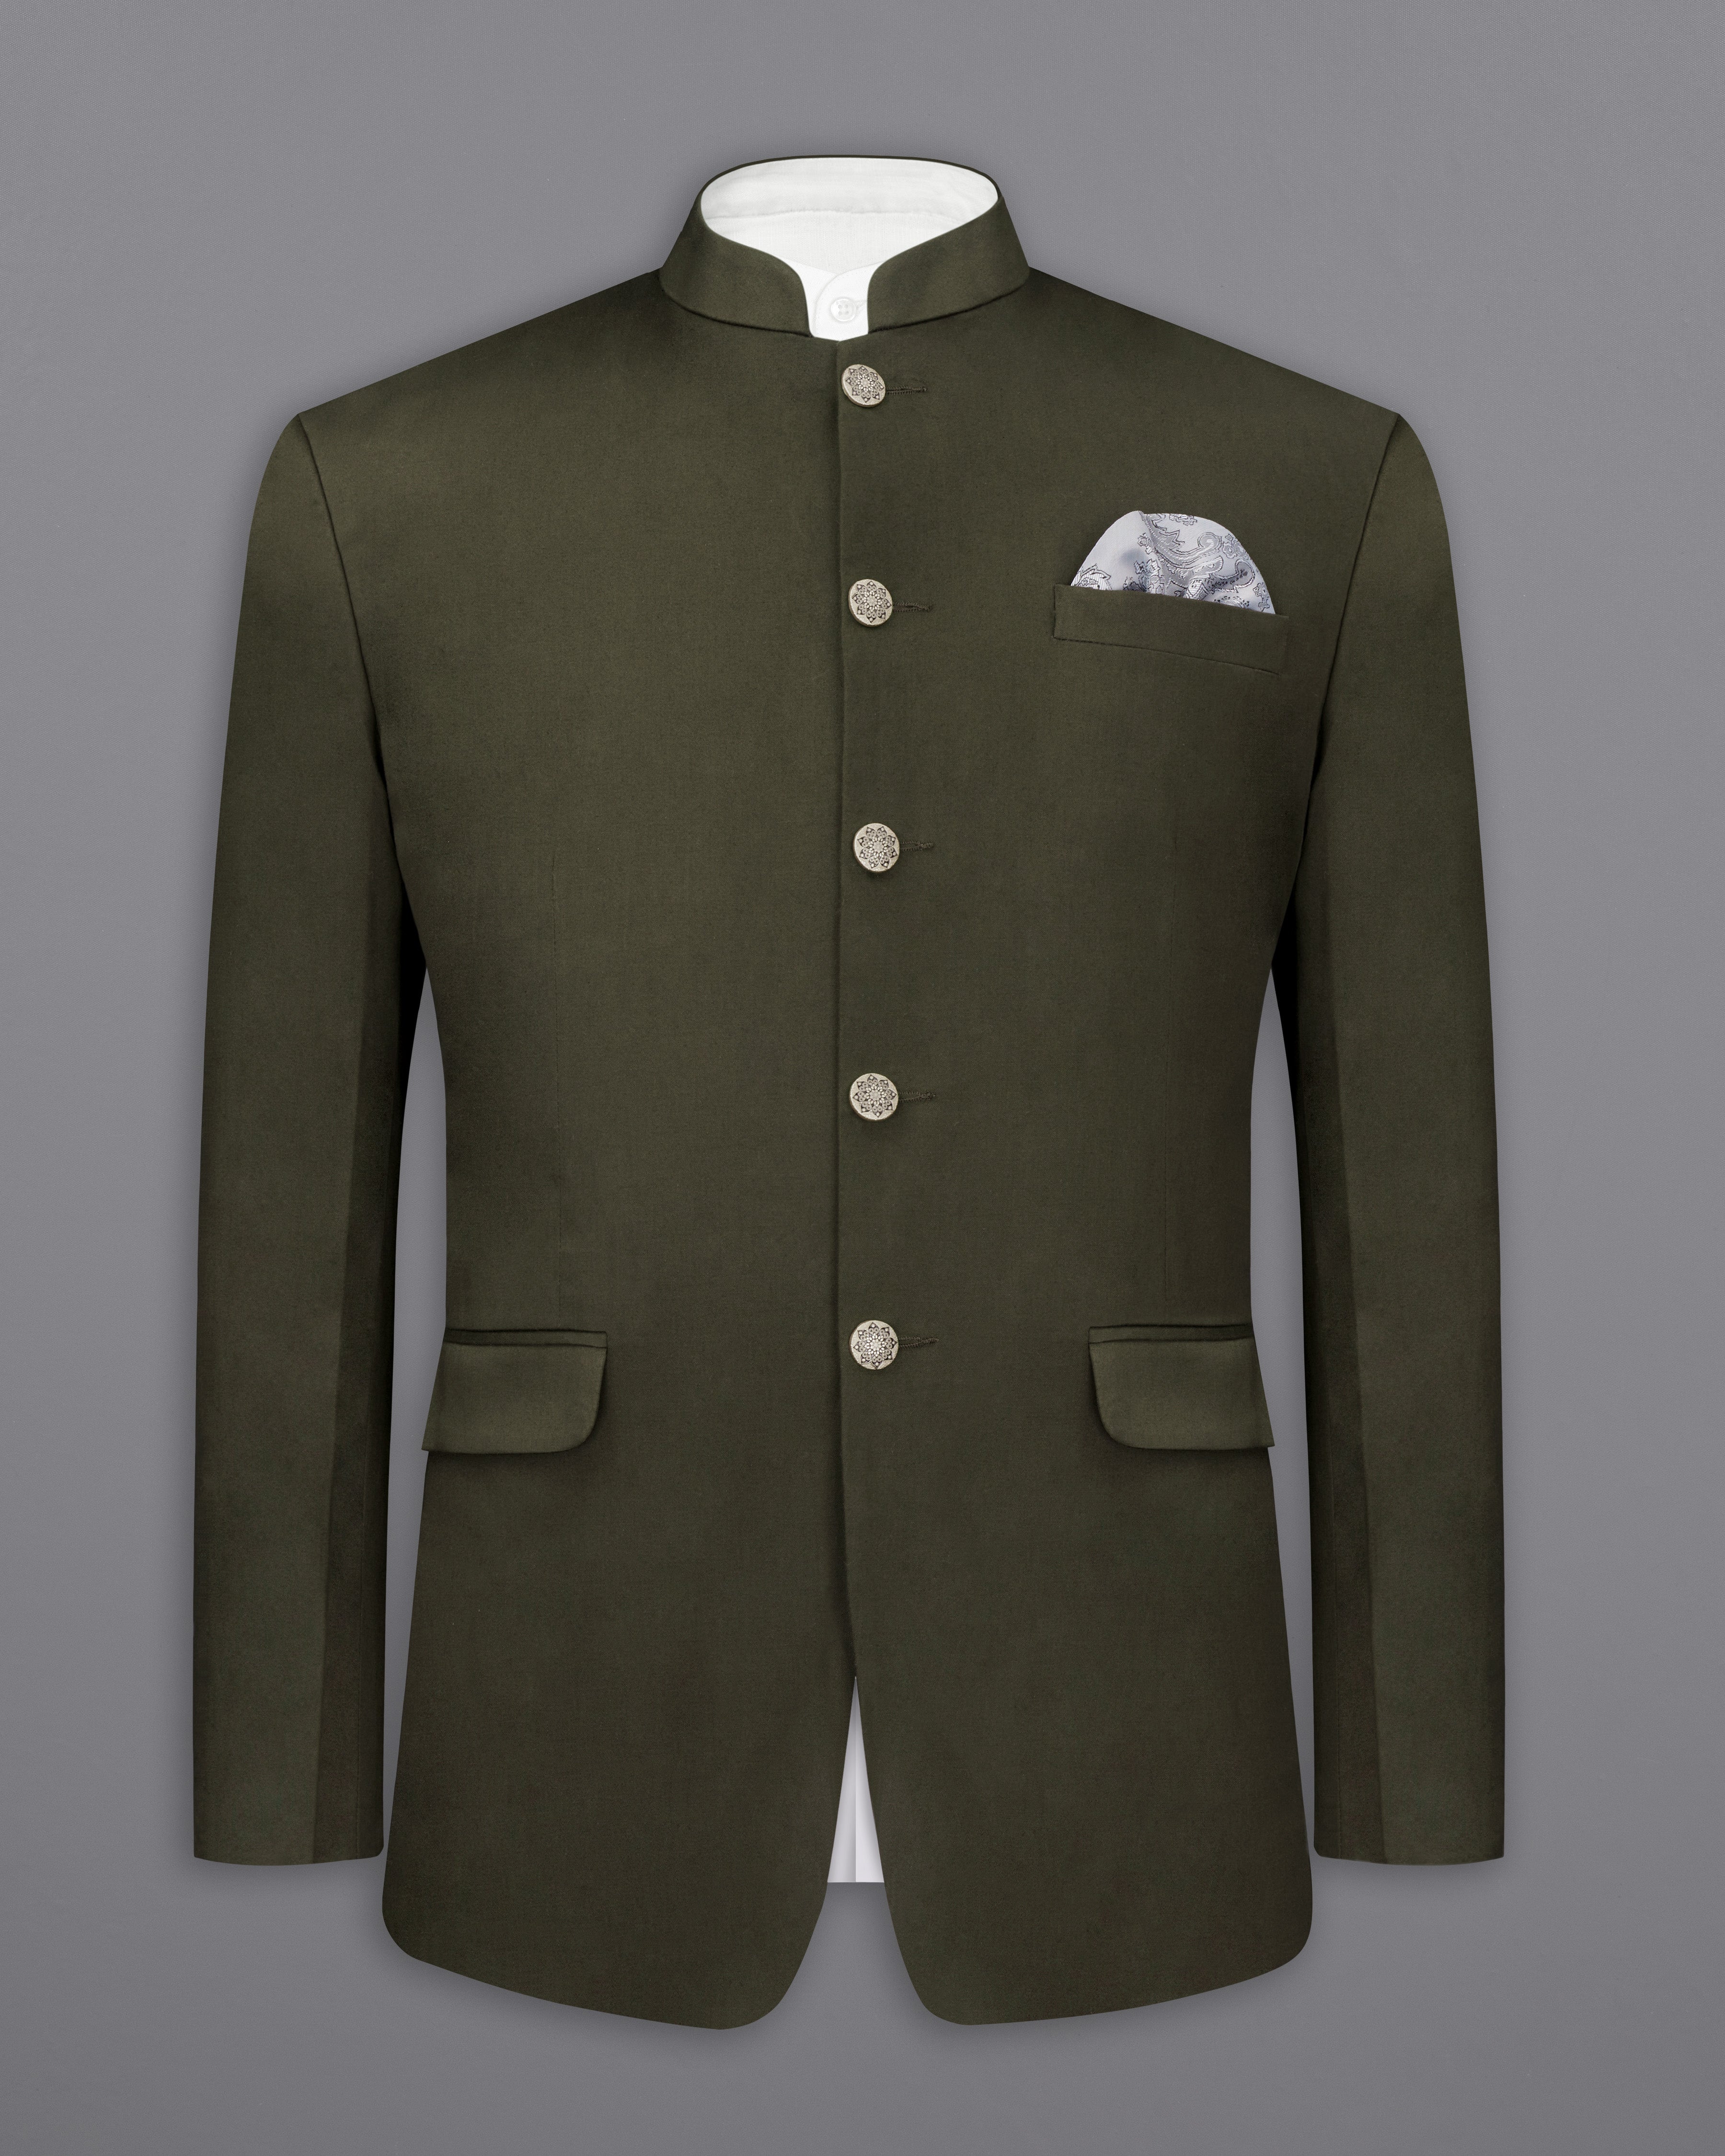 Taupe Green Solid Stretchable Premium Cotton Bandhgala traveler Suit ST2644-BG-36,ST2644-BG-38,ST2644-BG-40,ST2644-BG-42,ST2644-BG-44,ST2644-BG-46,ST2644-BG-48,ST2644-BG-50,ST2644-BG-52,ST2644-BG-54,ST2644-BG-56,ST2644-BG-58,ST2644-BG-60